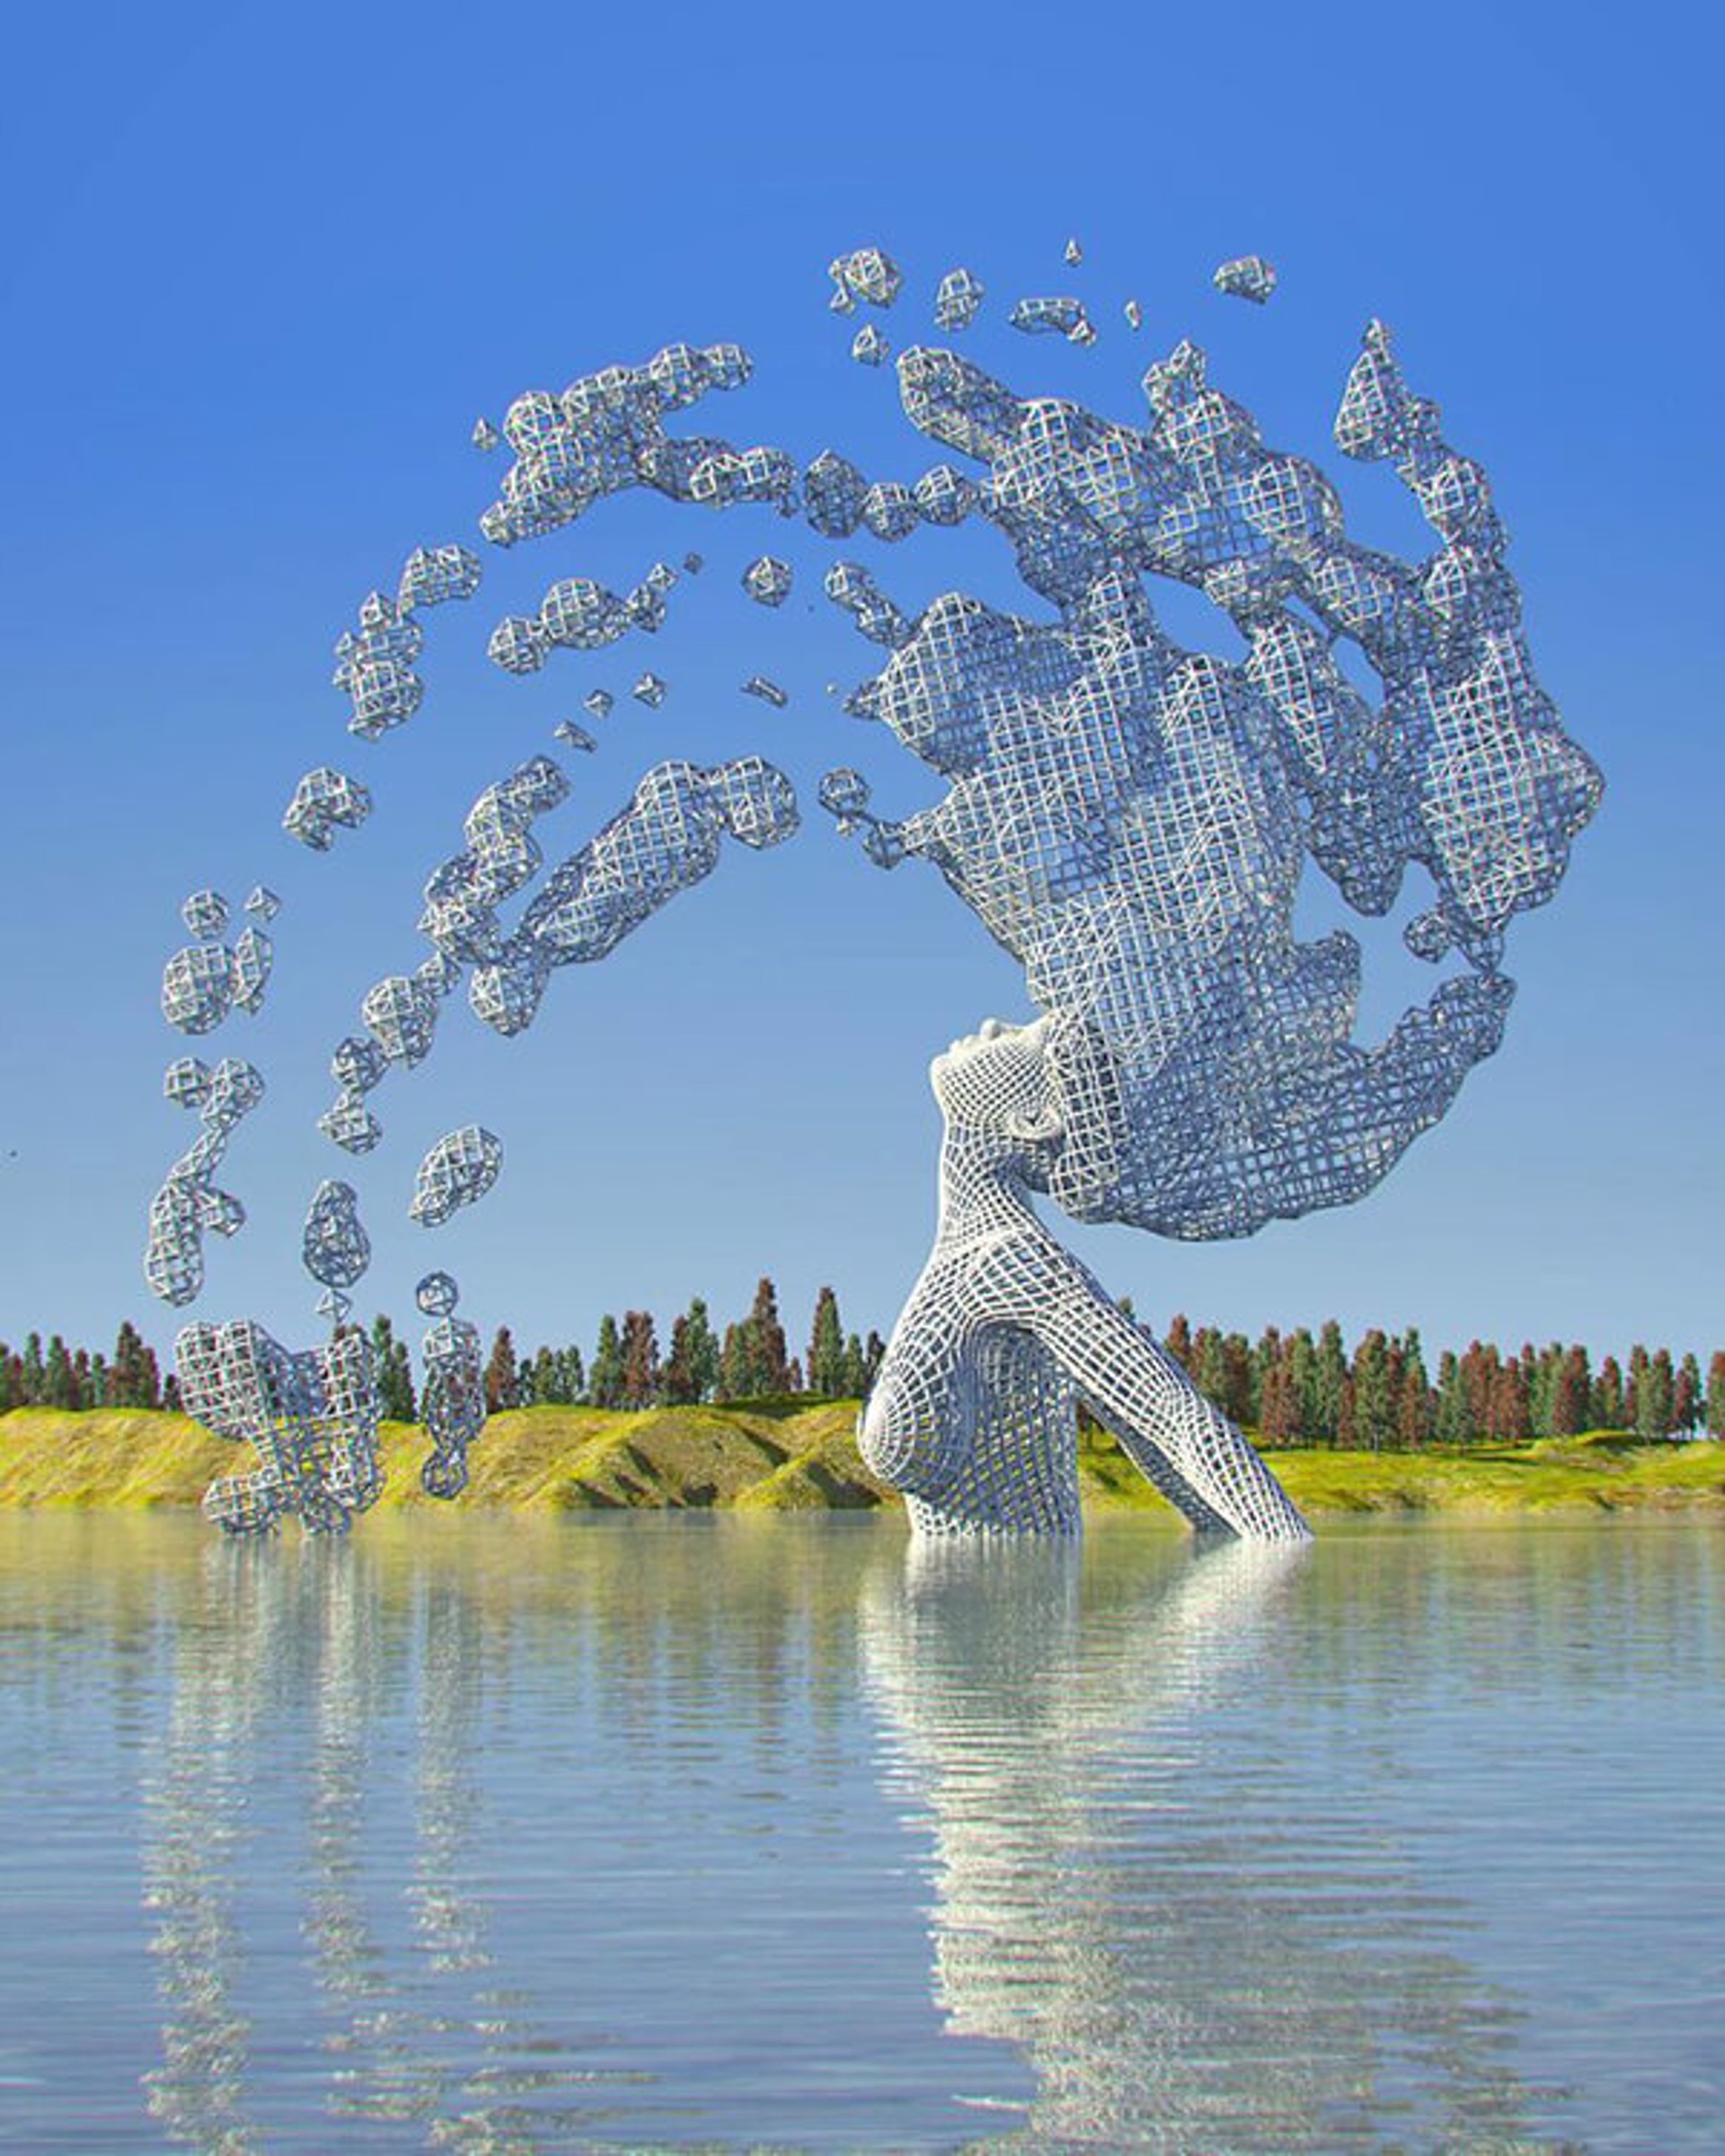 Regenesis (other sizes available upon request) by Chad Knight